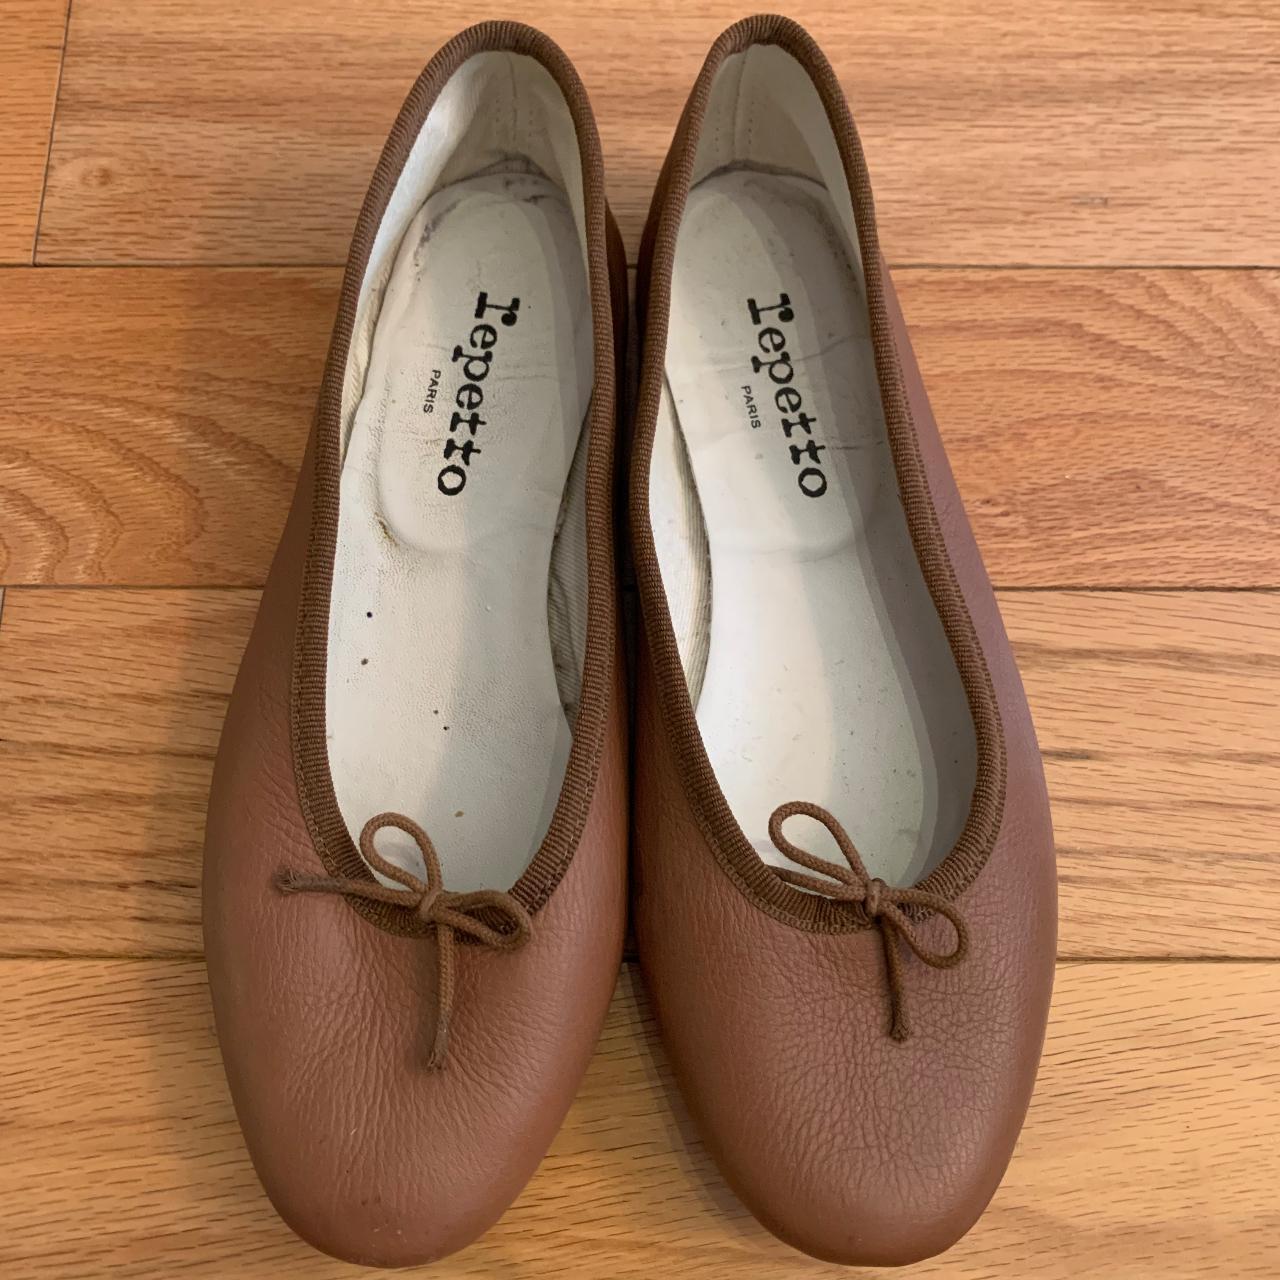 Repetto Cendrillon Ballet Flats Size 7, in great... - Depop